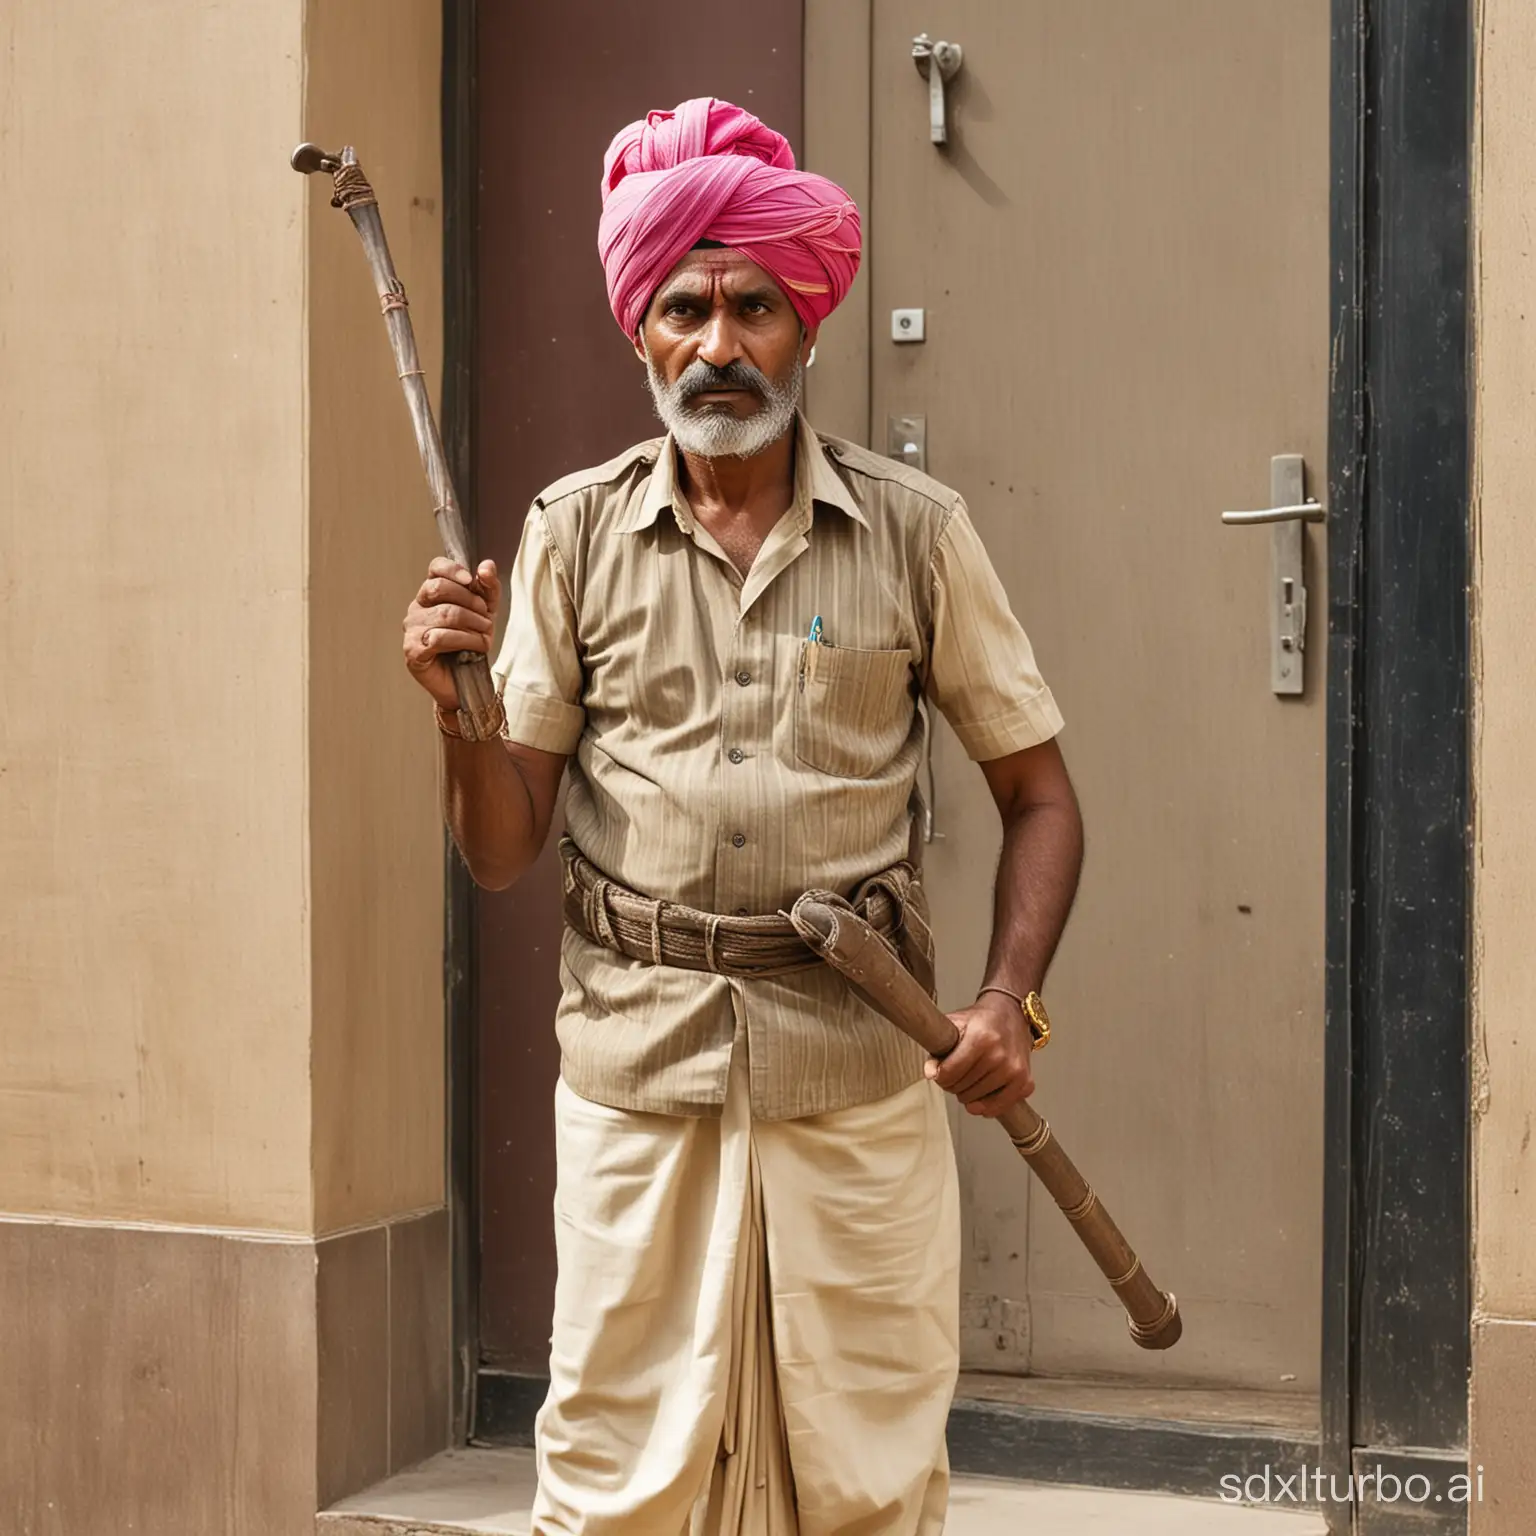 Indian man security at a bank entrance, aged 50 years, holding a lathi in one hand , angry face